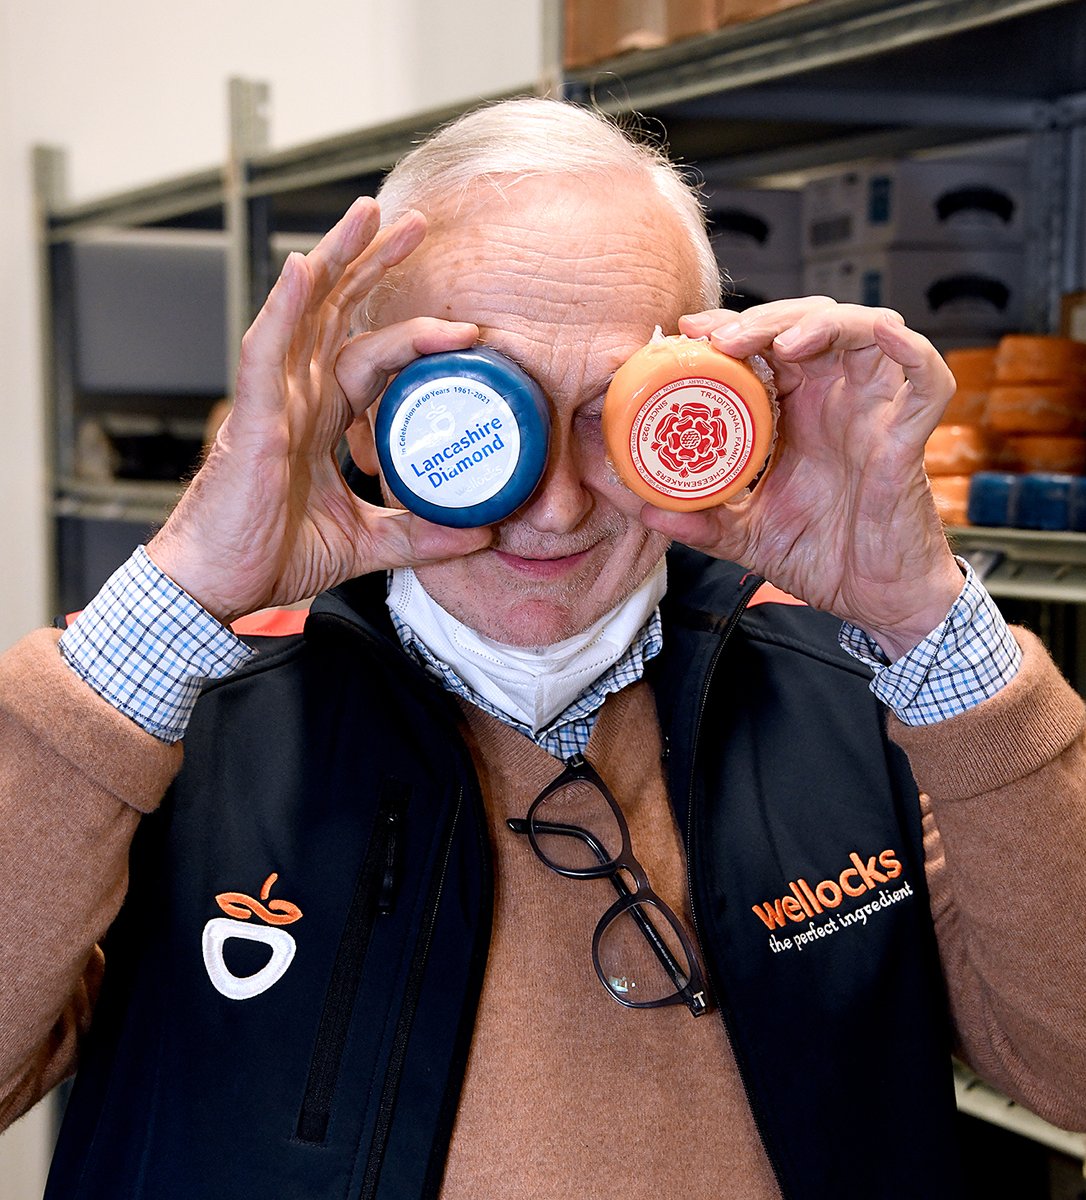 .@KoffmannPierre only has eyes for our Lancashire Diamond, made by @SandhamCheese. Discover more about our Lancashire Diamond and JJ Sandham in the July Edition of @ChefPublsihing > bit.ly/2UzYAlC @KoffmannsFoods